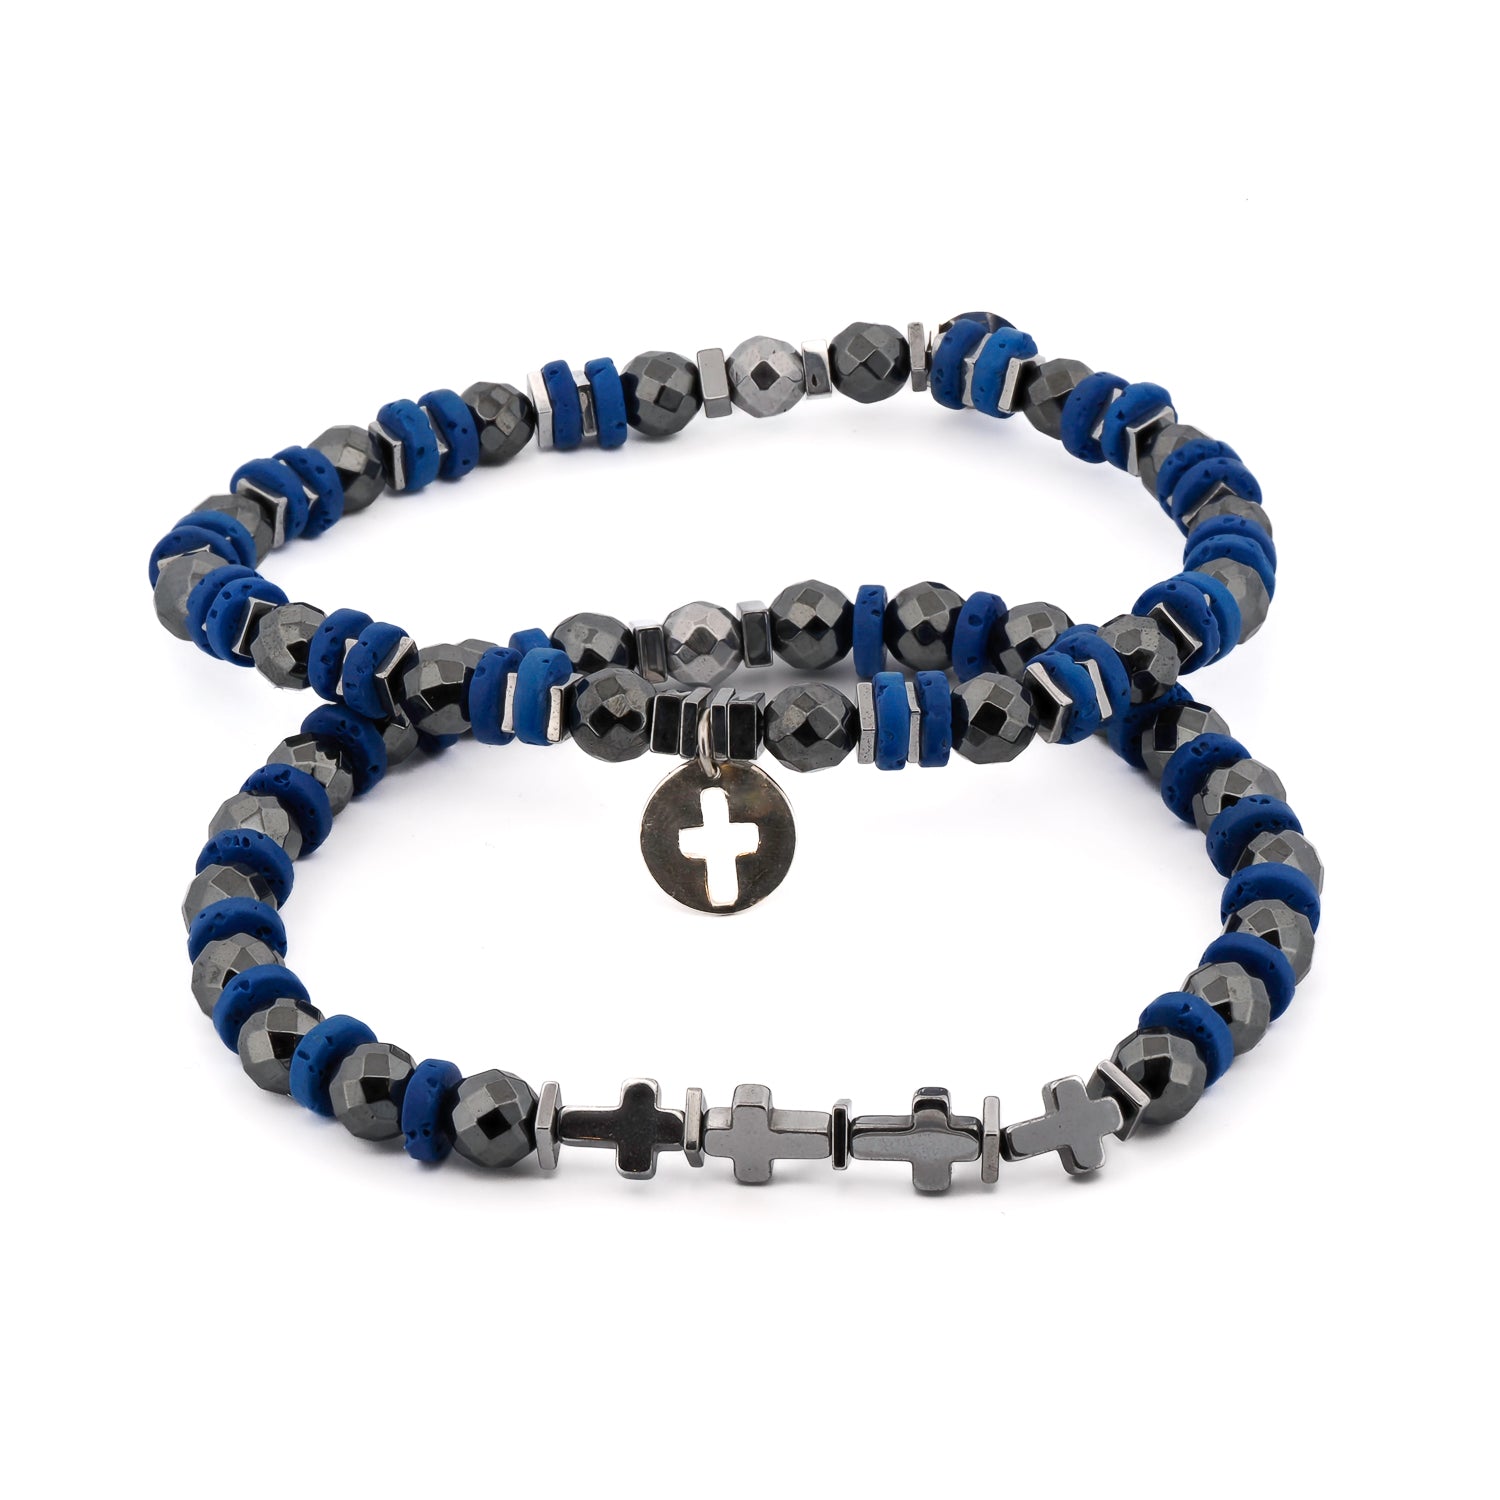 Good Vibes Spiritual Beaded Sterling Silver Cross Bracelet Set featuring natural hematite stone beads known for grounding and healing properties